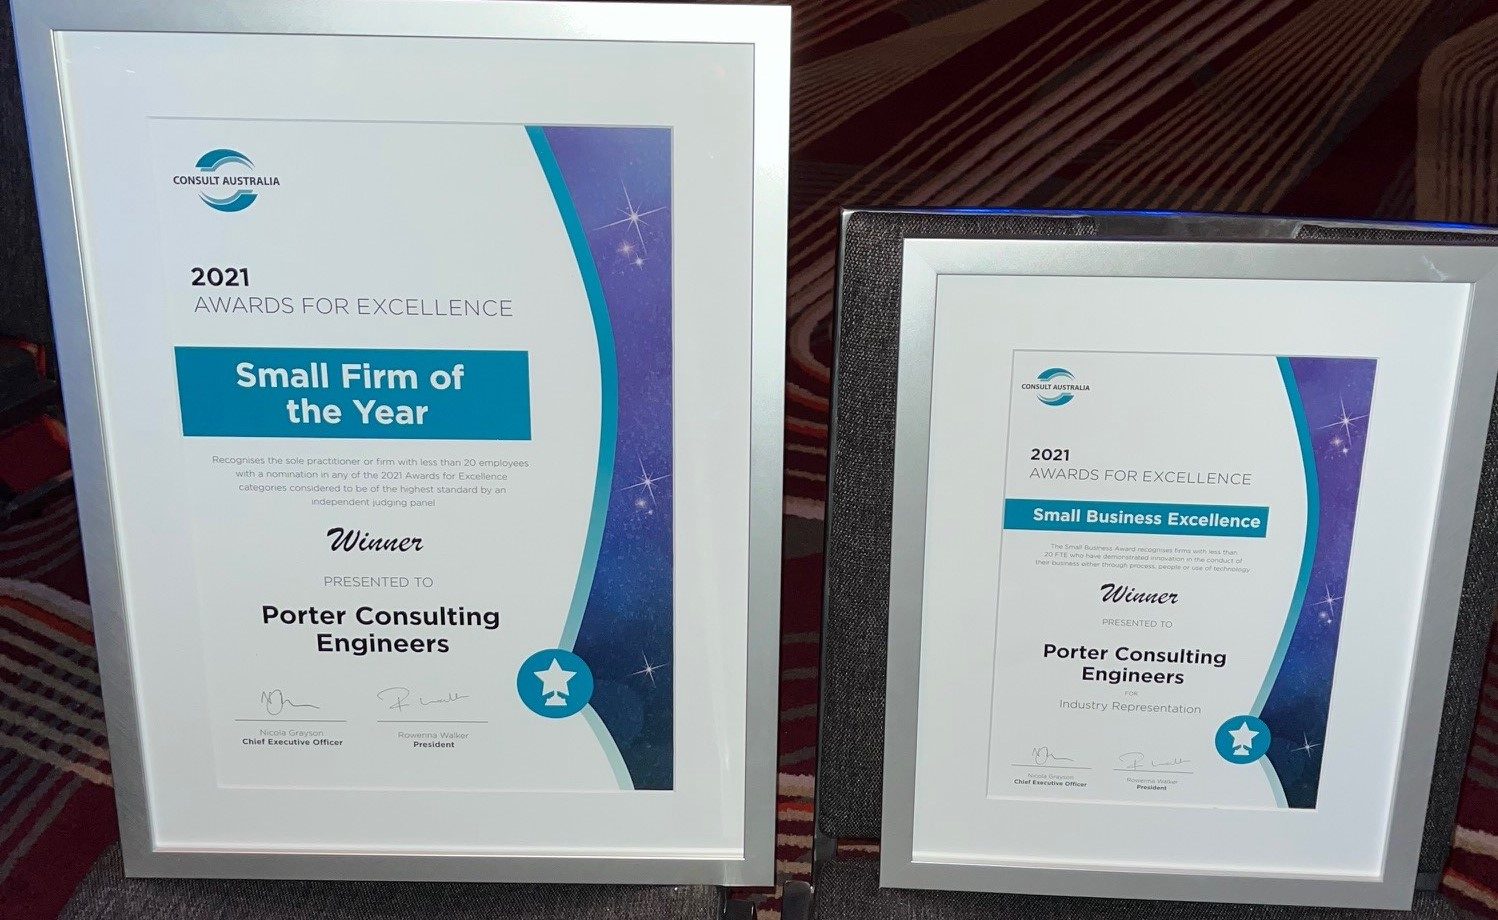 Framed awards for Porter Consulting Engineers